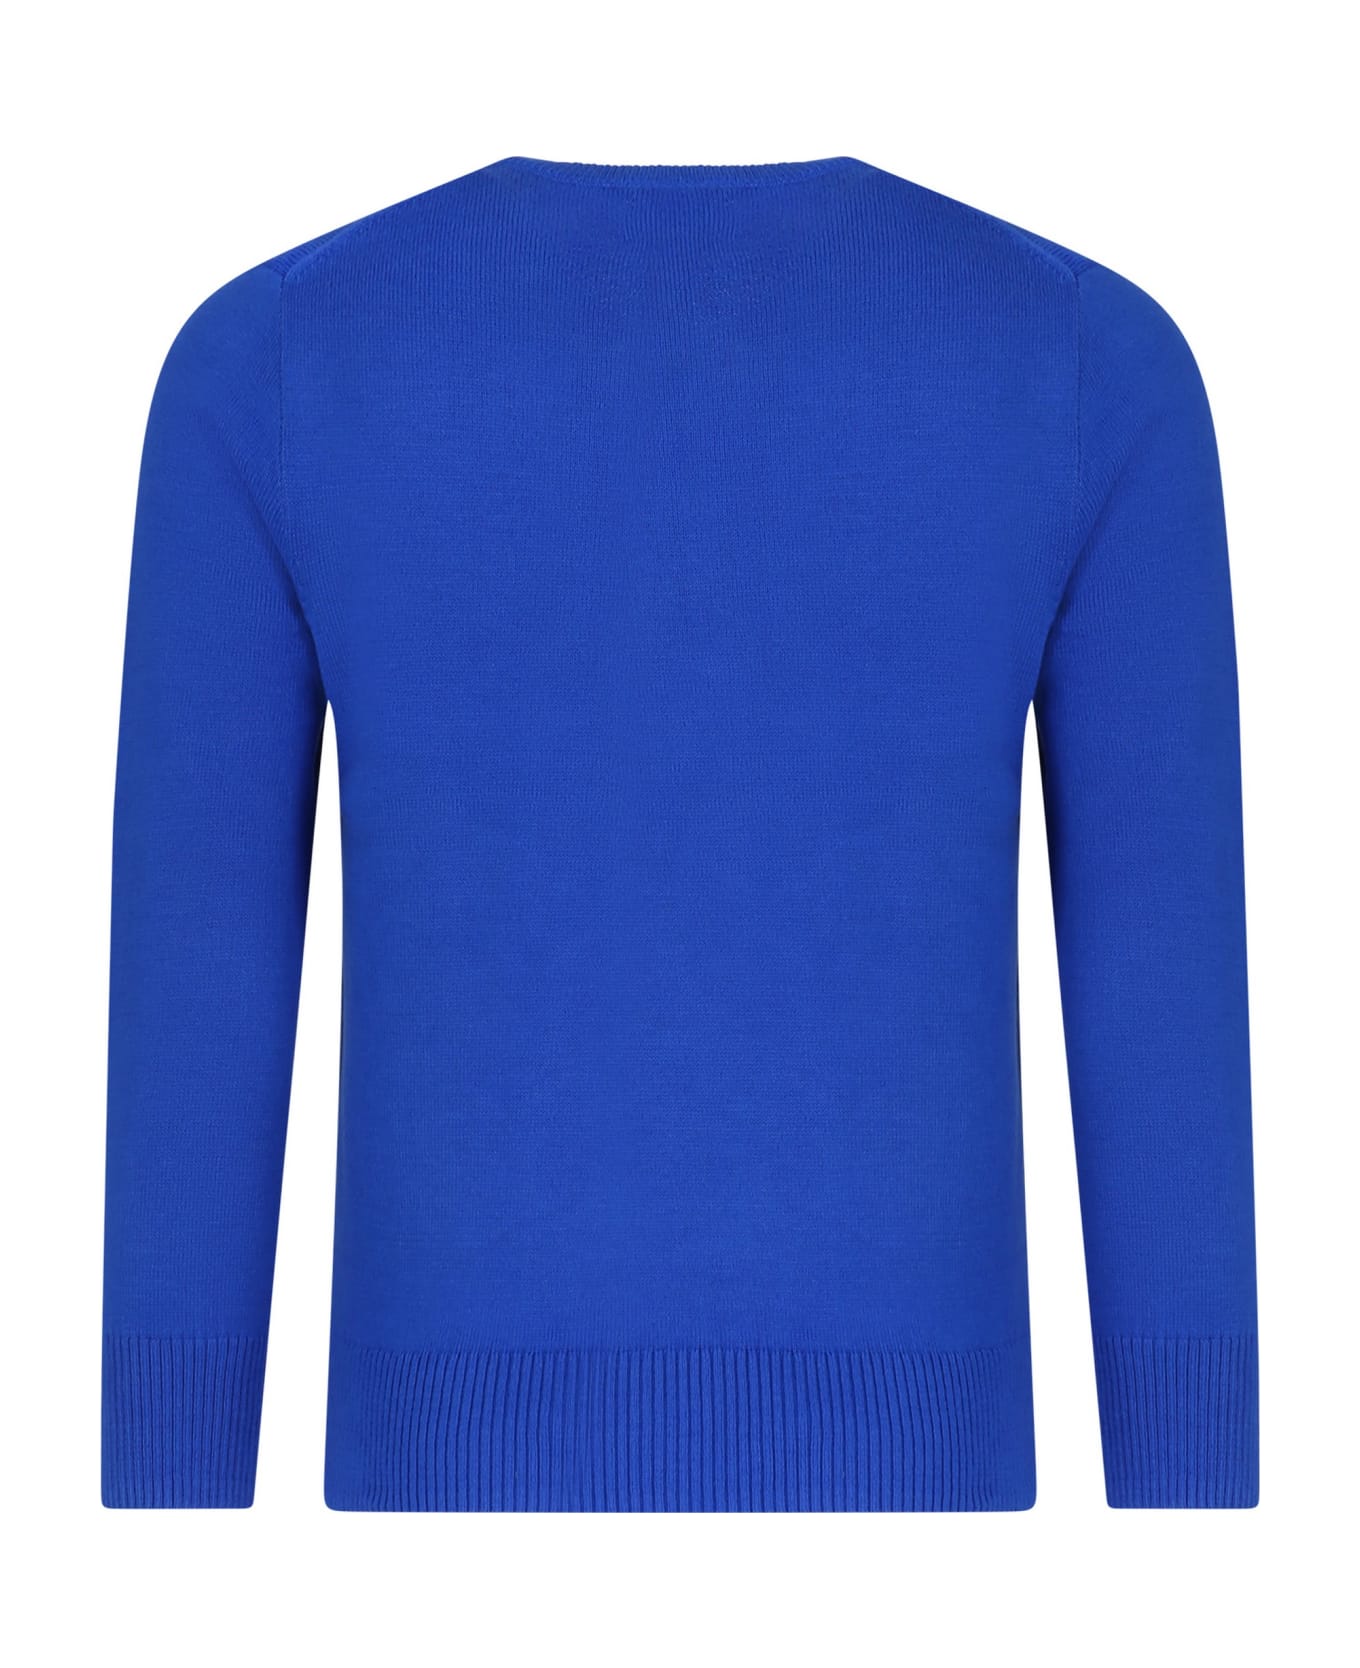 Ralph Lauren Blue Sweater For Boy With Embroidery - Light Blue